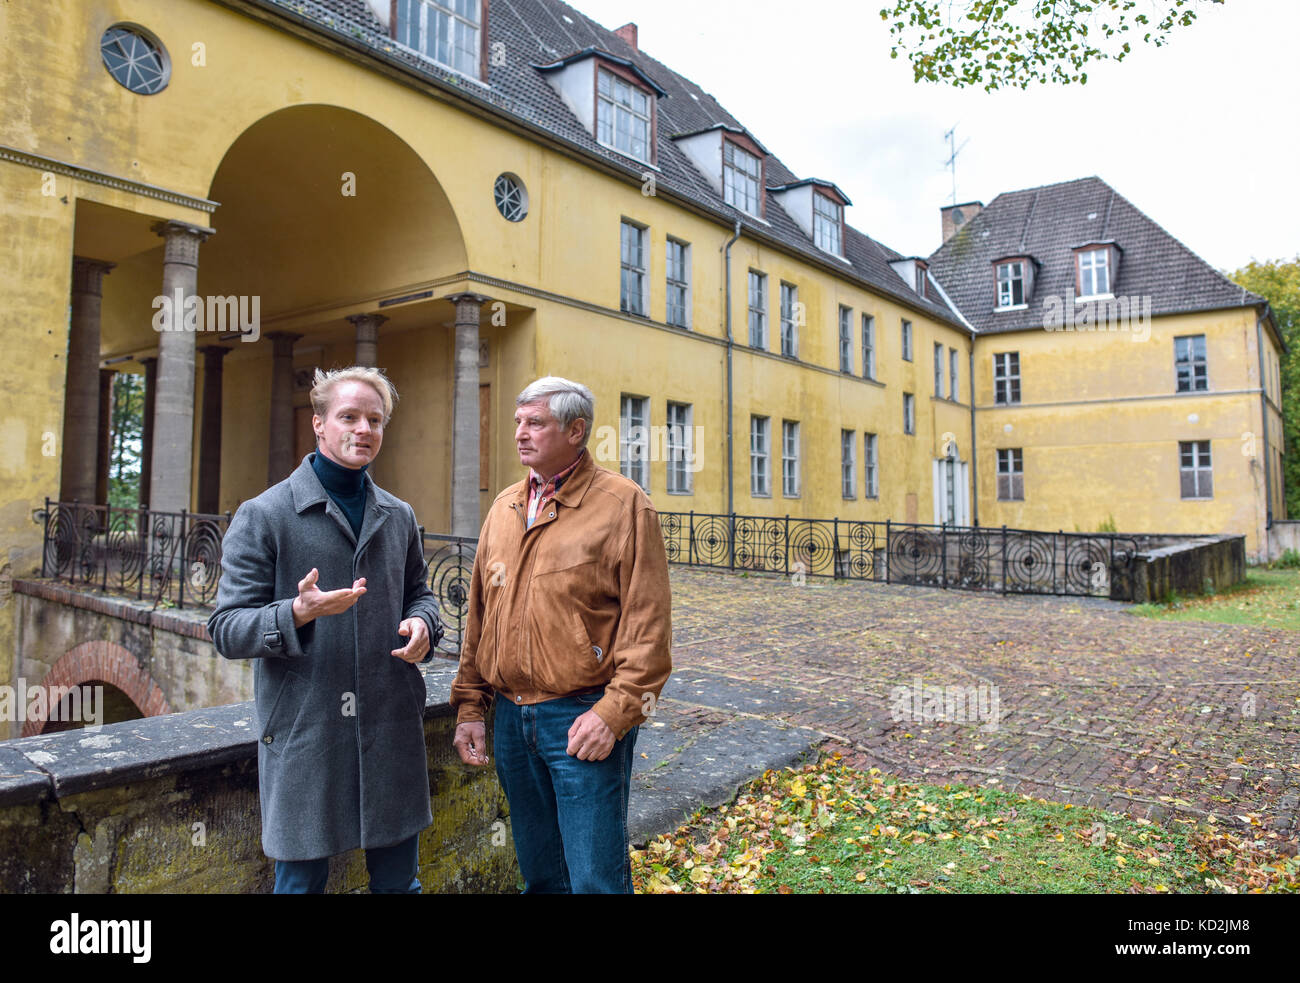 Templin, Germany. 7th Oct, 2017. Dr. Ferdinand von Saint Andre (l), manager of the Stiftung Gebaeudeensemble Joachimsthalsches Gymnasium Templin, and former mayor of Templin, Ulrich Schoeneich, pictured outside a building of the Joachimsthalsche Gymnasium school in Templin, Germany, 7 October 2017. The new Joachimsthalsche Gymnasium is to become a European School. Credit: Patrick Pleul/dpa-Zentralbild/ZB/dpa/Alamy Live News Stock Photo